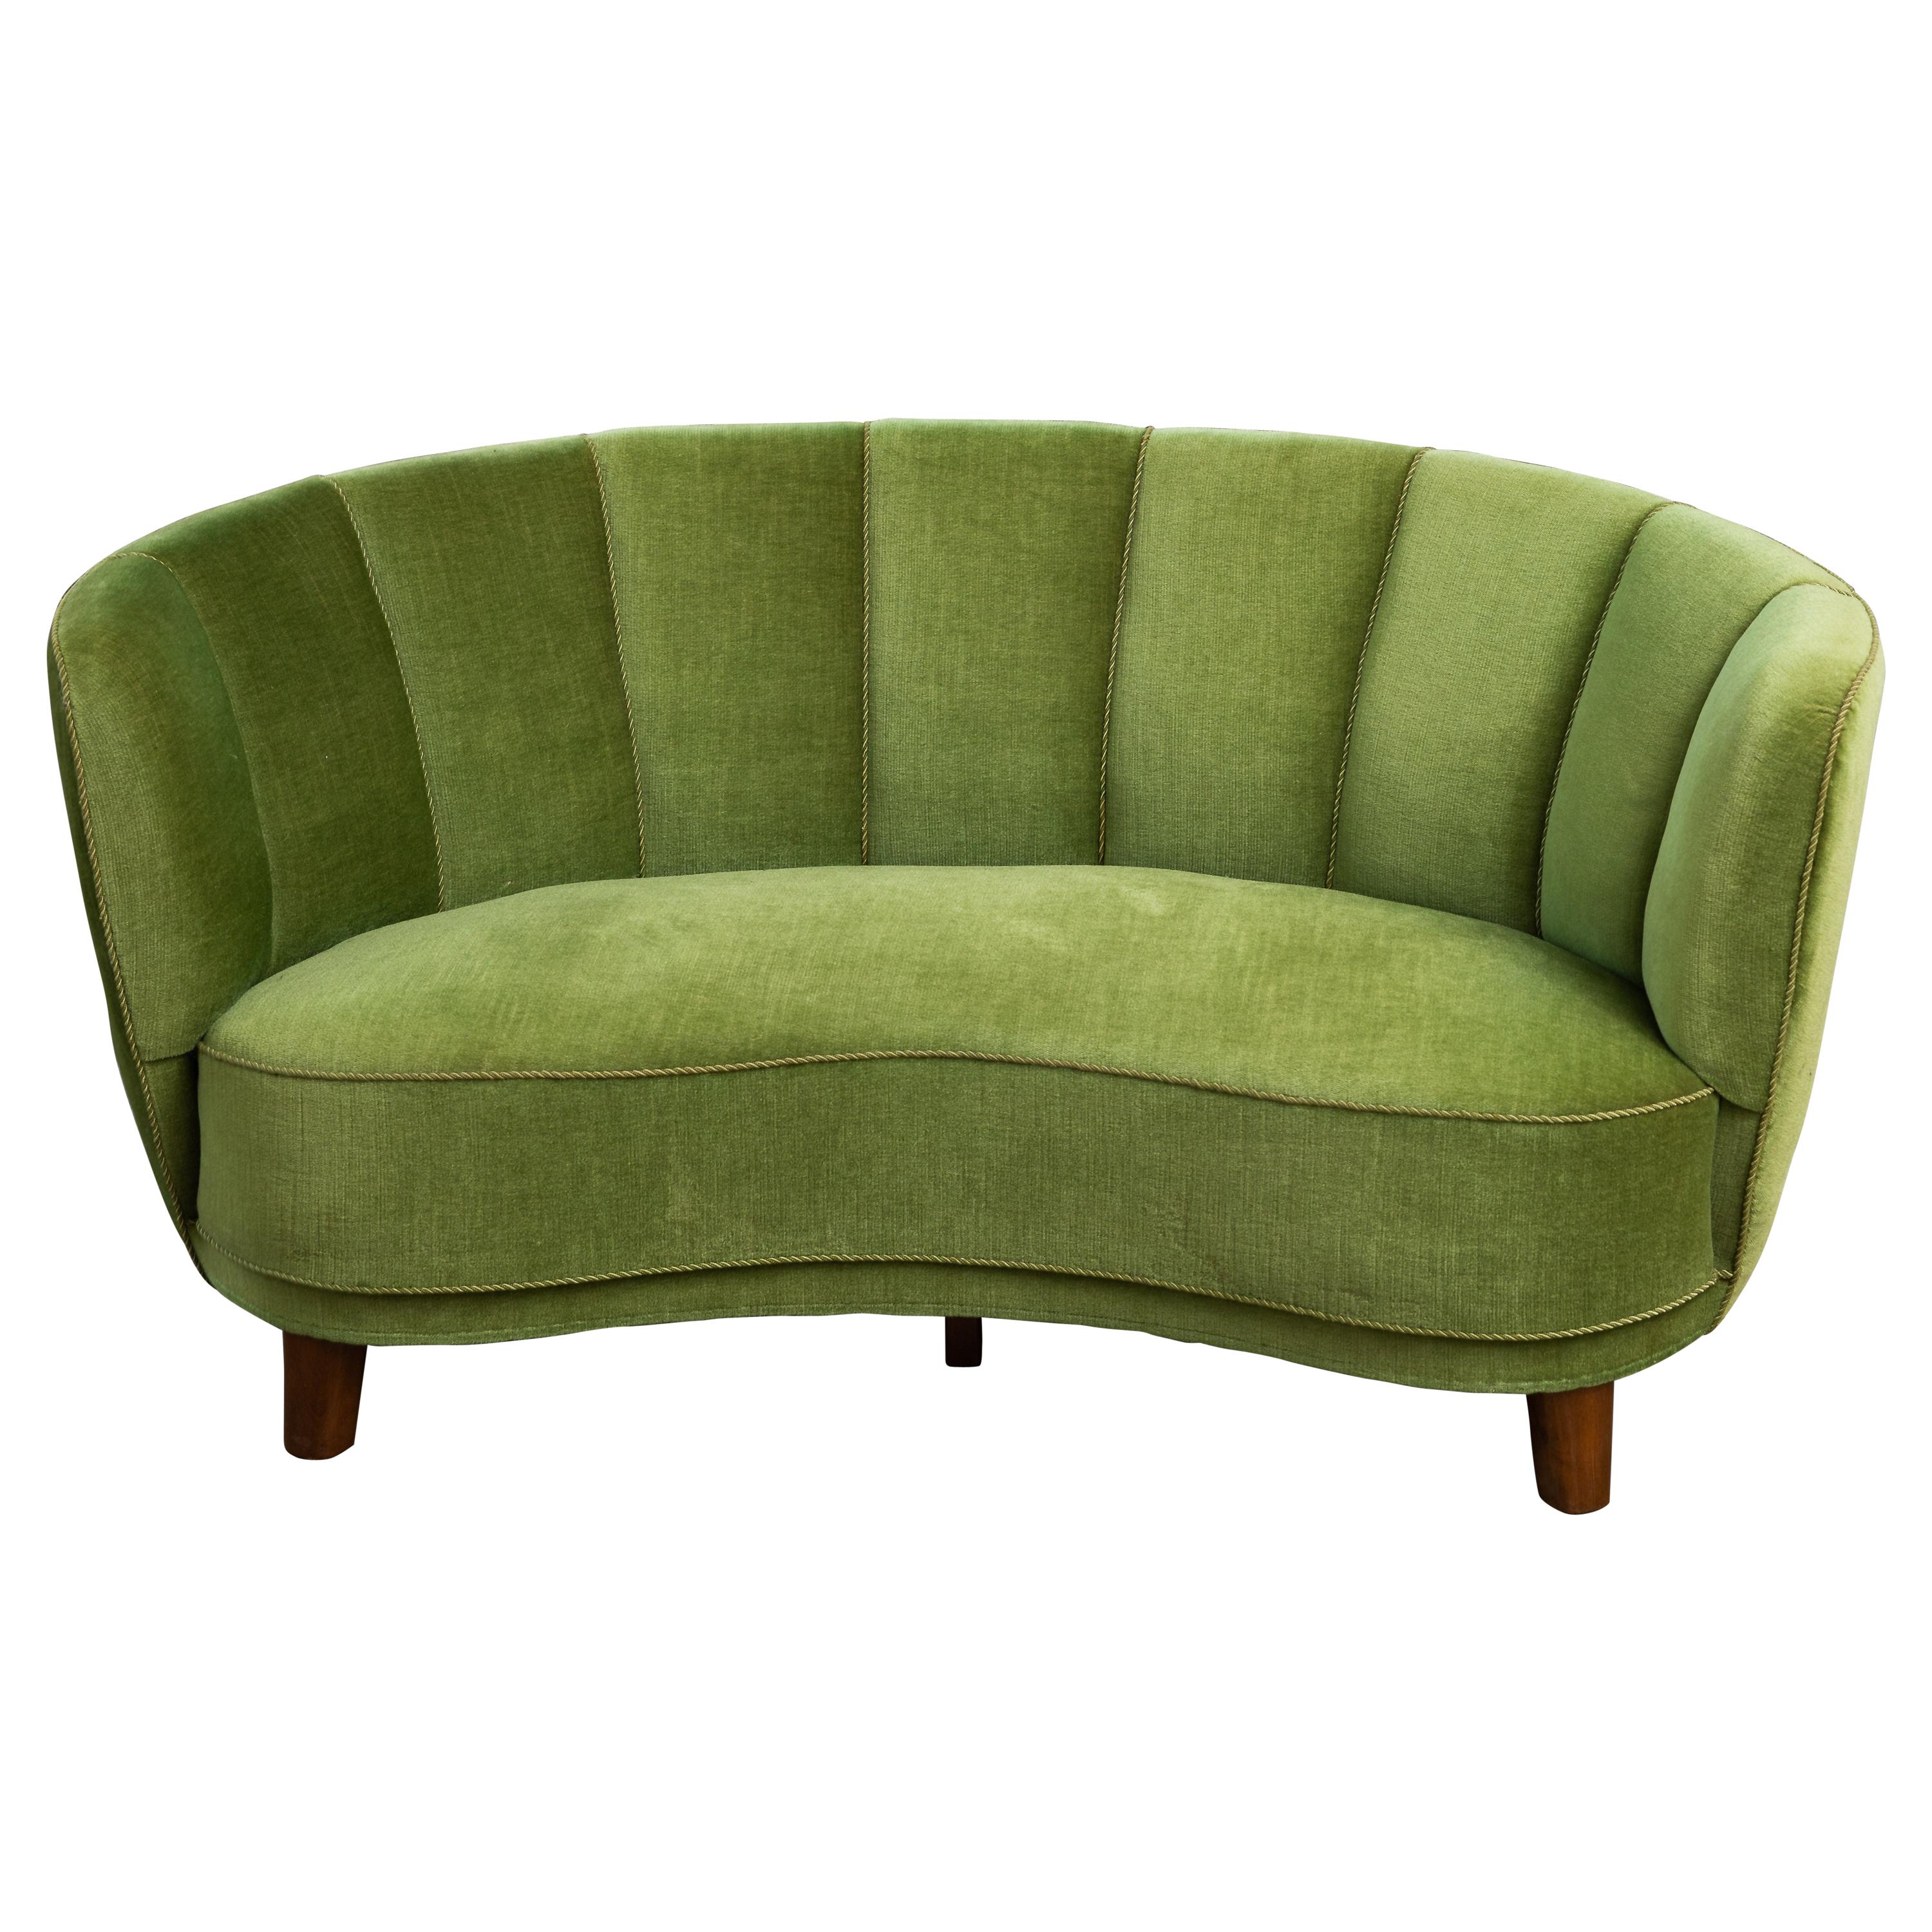 Danish 1940s Boesen Style Banana Form Curved Sofa or Loveseat in Green Mohair